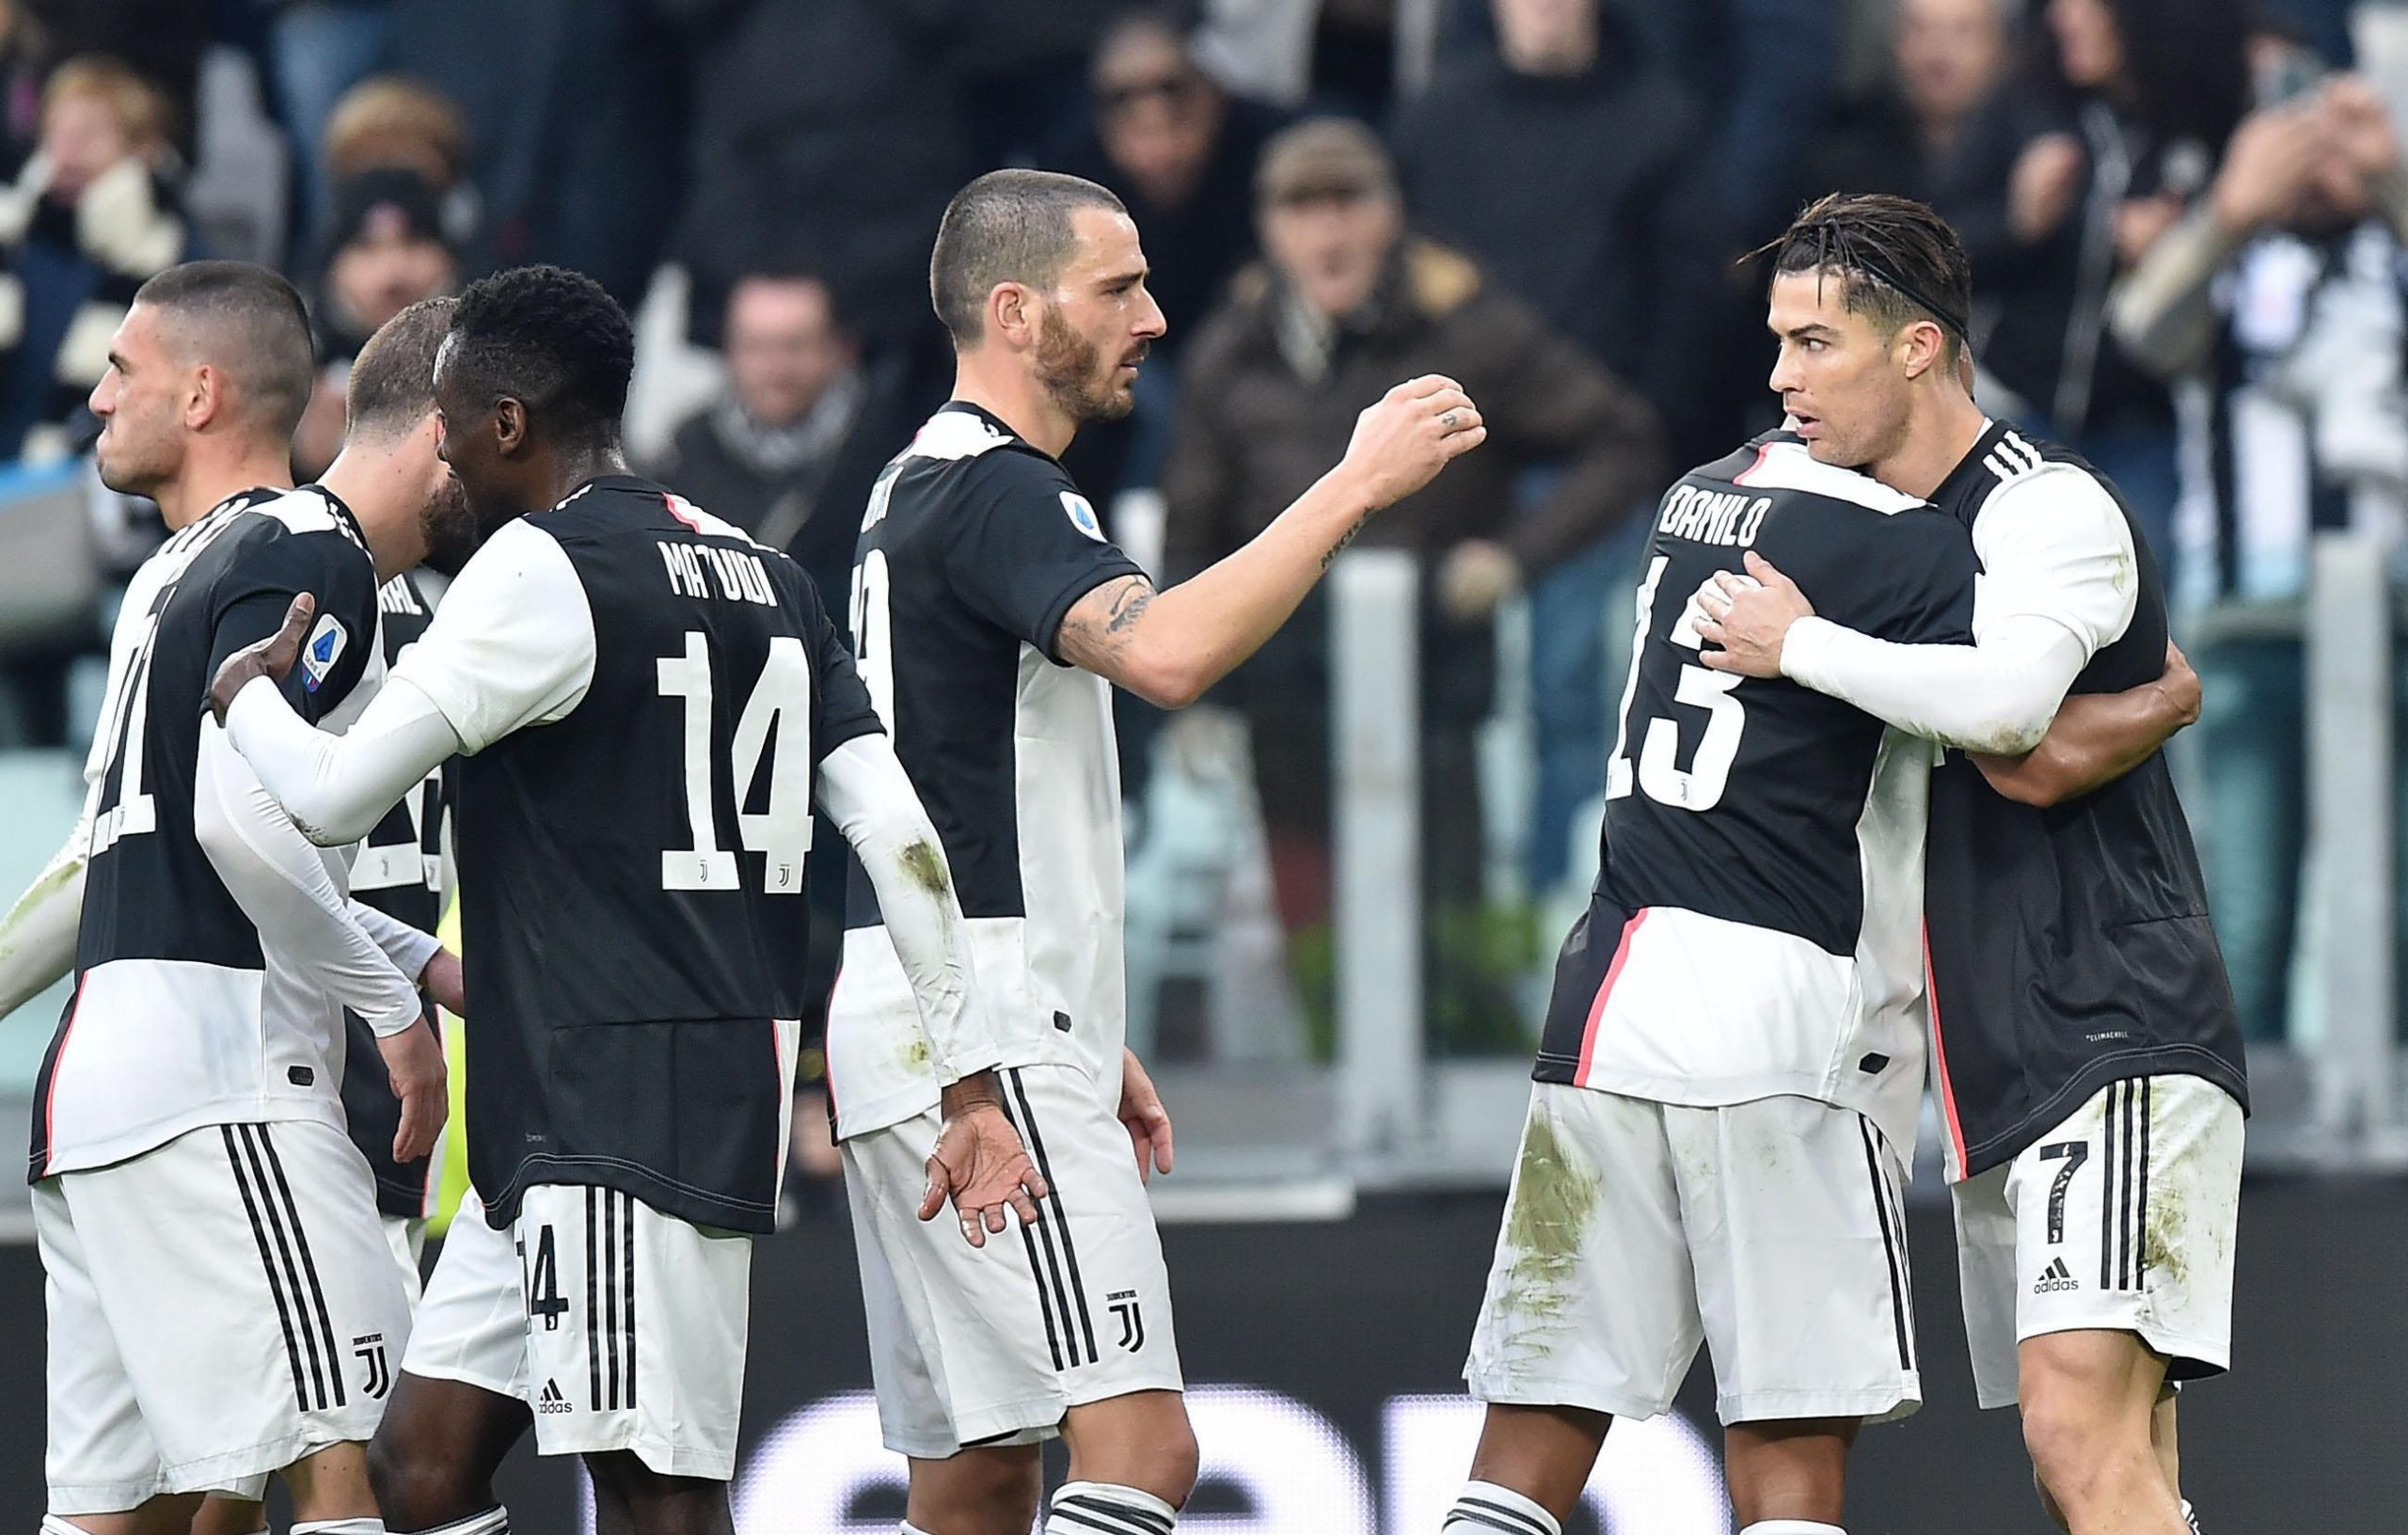 epa08073801 Juventus' Cristiano Ronaldo (R) jubilates with his teammates after scoring during the Italian Serie A soccer match Juventus FC vs Udinese Calcio at the Allianz Stadium in Turin, Italy, 15 December 2019.  EPA/ALESSANDRO DI MARCO